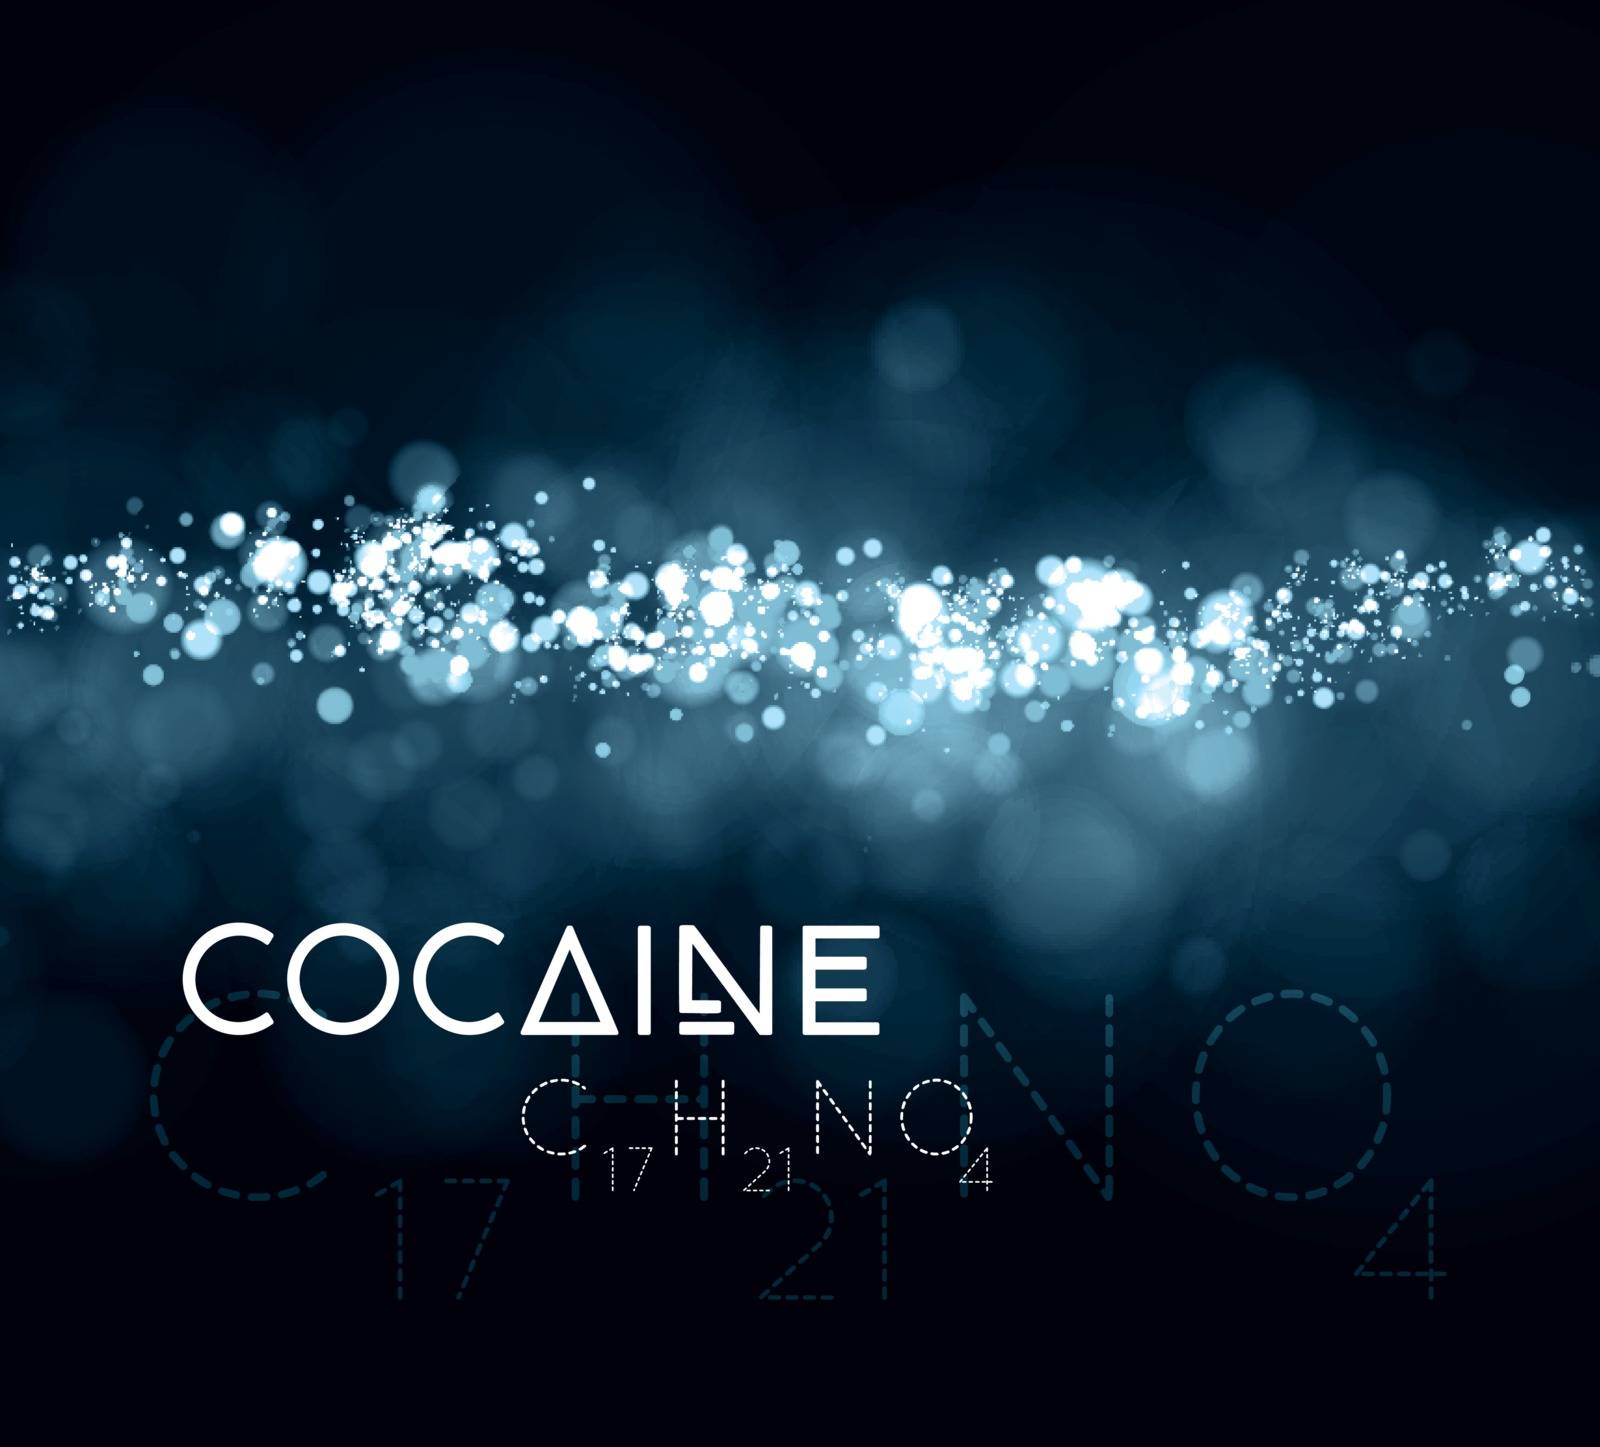 Cocaine powder with the chemical formula. by sermax55